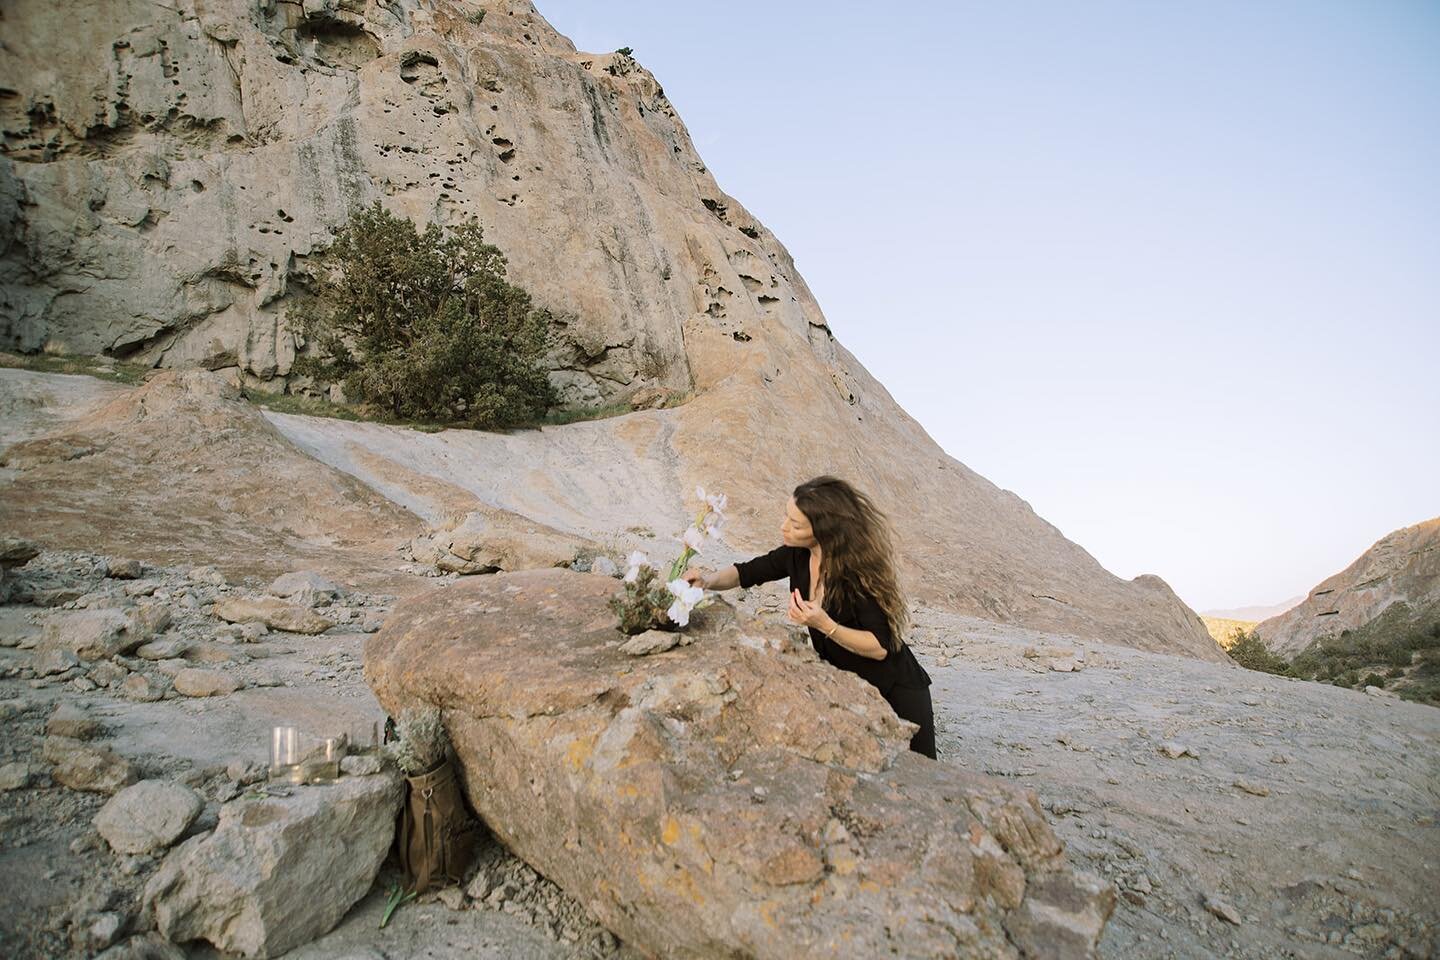 Before any arrangement, I slow myself, and I observe. The curvature of rock, the color, and texture of the landscape, the feeling of the moment, all inform the design.

See the latest at www.wildflora.co/journal

Photo @lexcmarie
For @barebonesliving